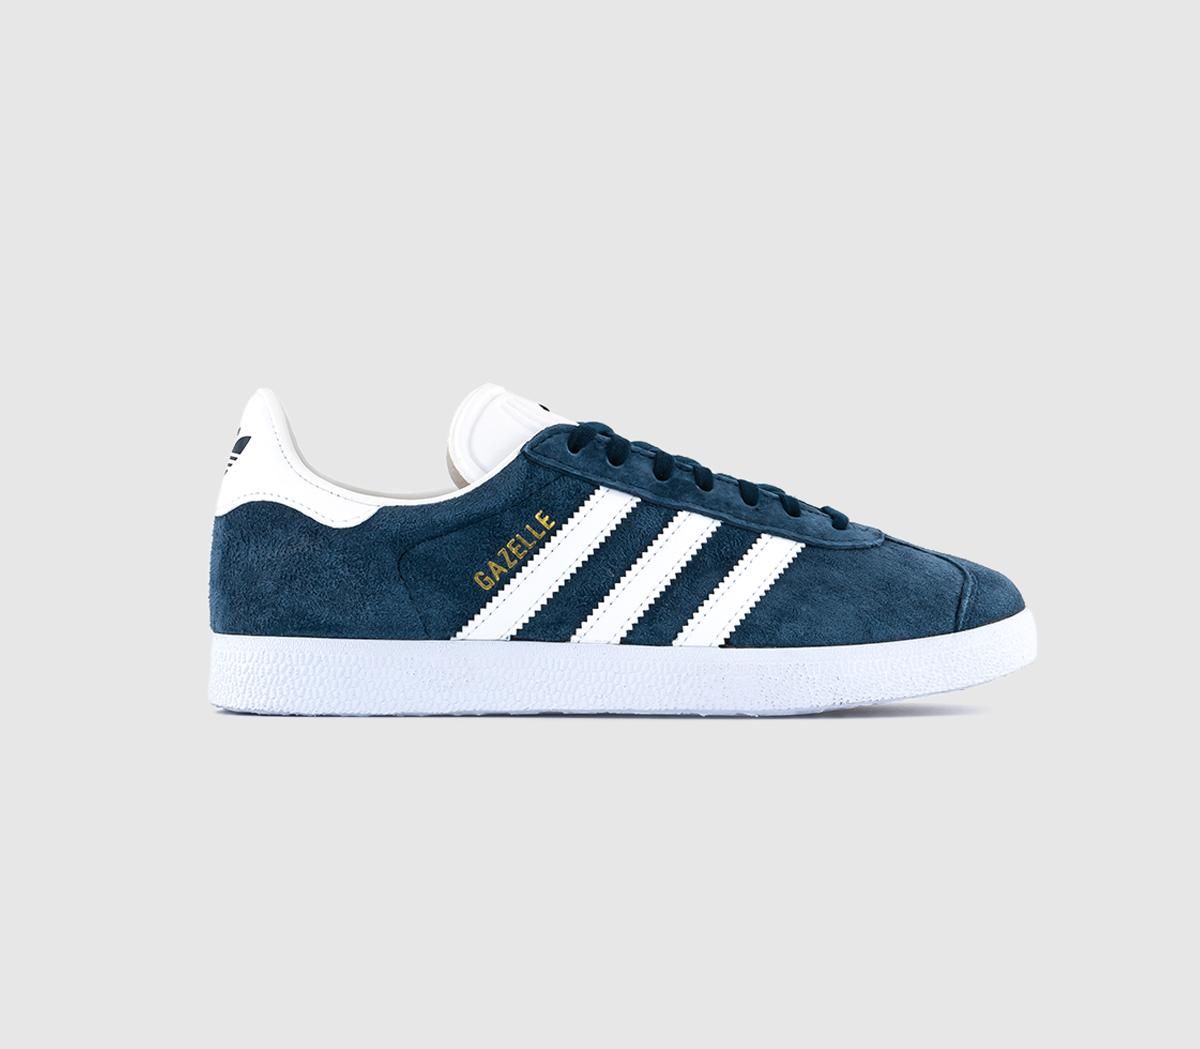 adidas gazelle trainers night grey carbon silver exclusive